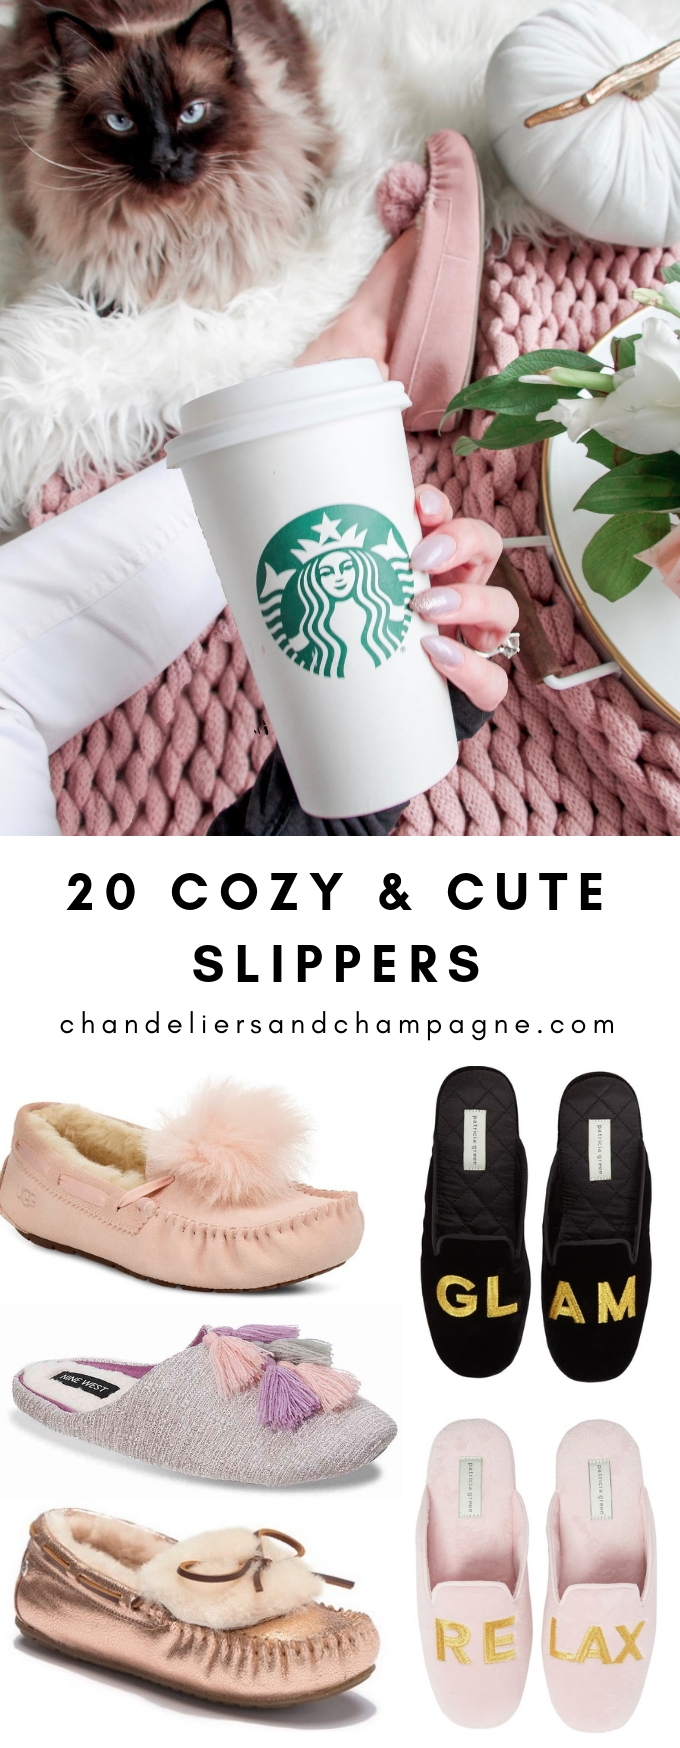 20 Cozy and Cute Slippers: glamorous slippers and moccasins to get your higgle on this fall